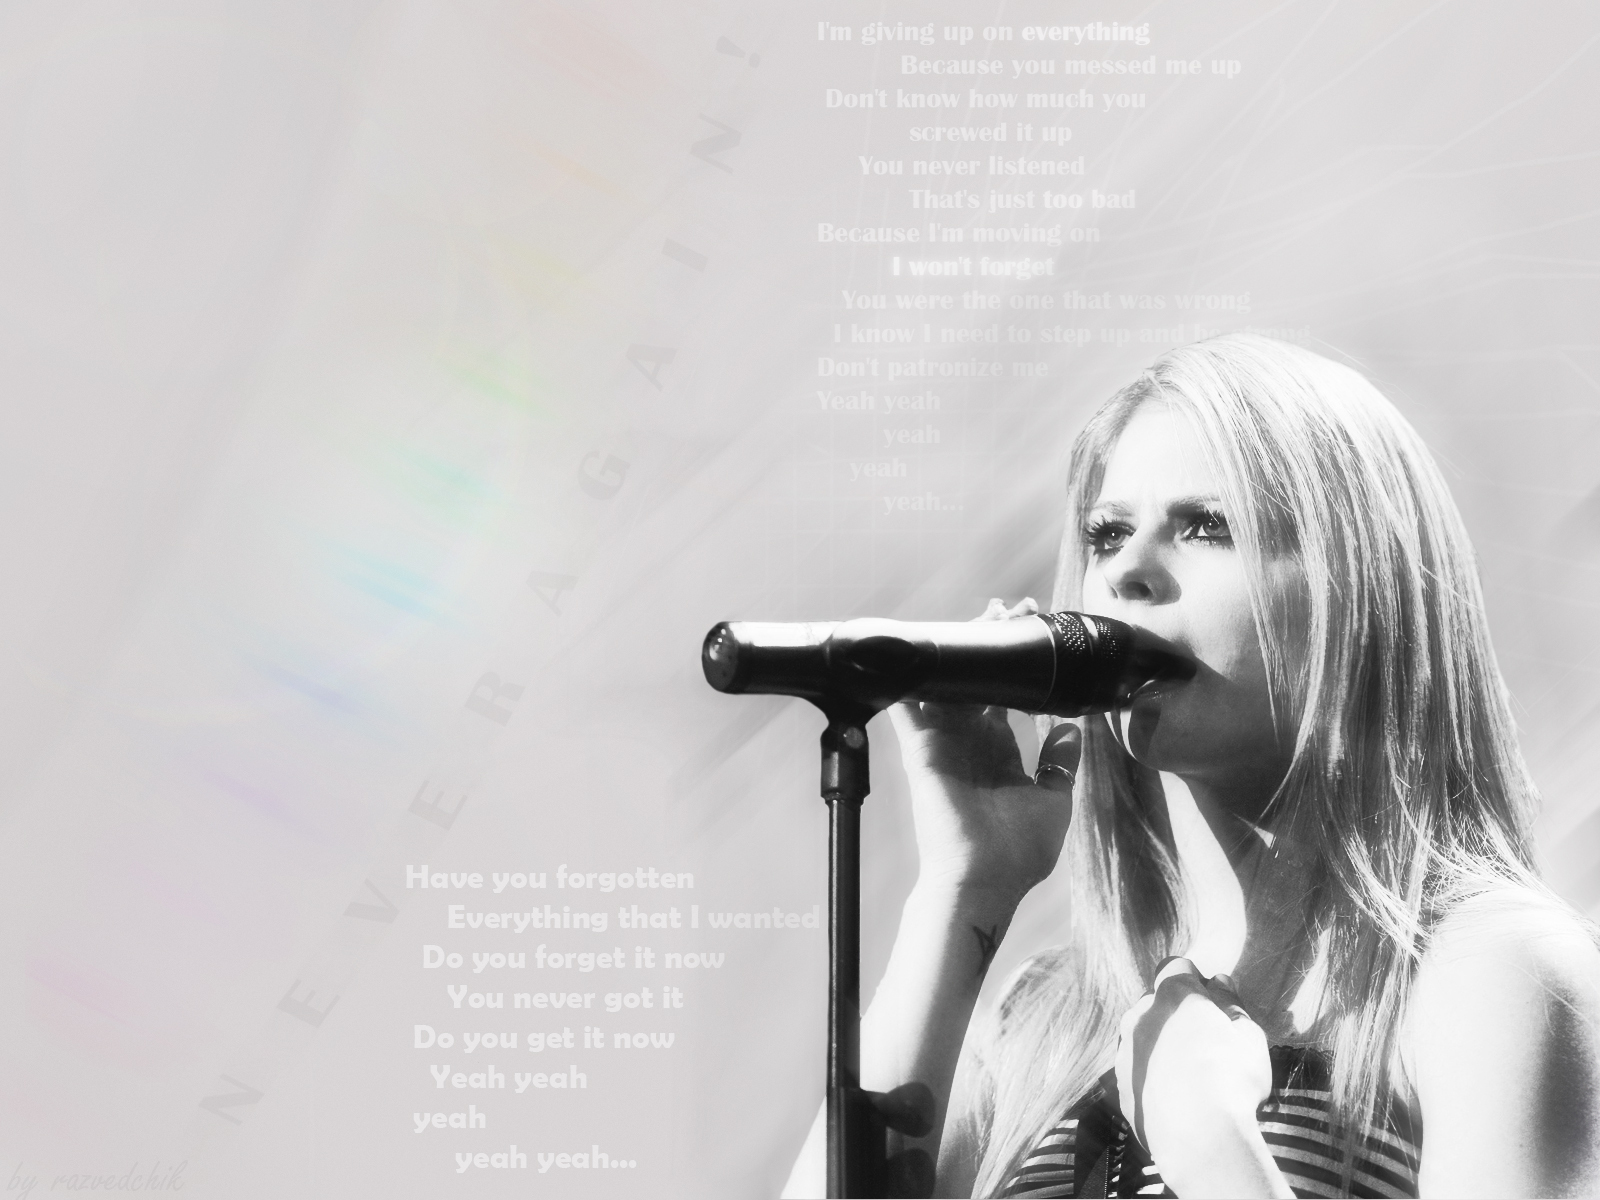 Avril Lavigne Image Forgotten HD Wallpaper And Background Photos